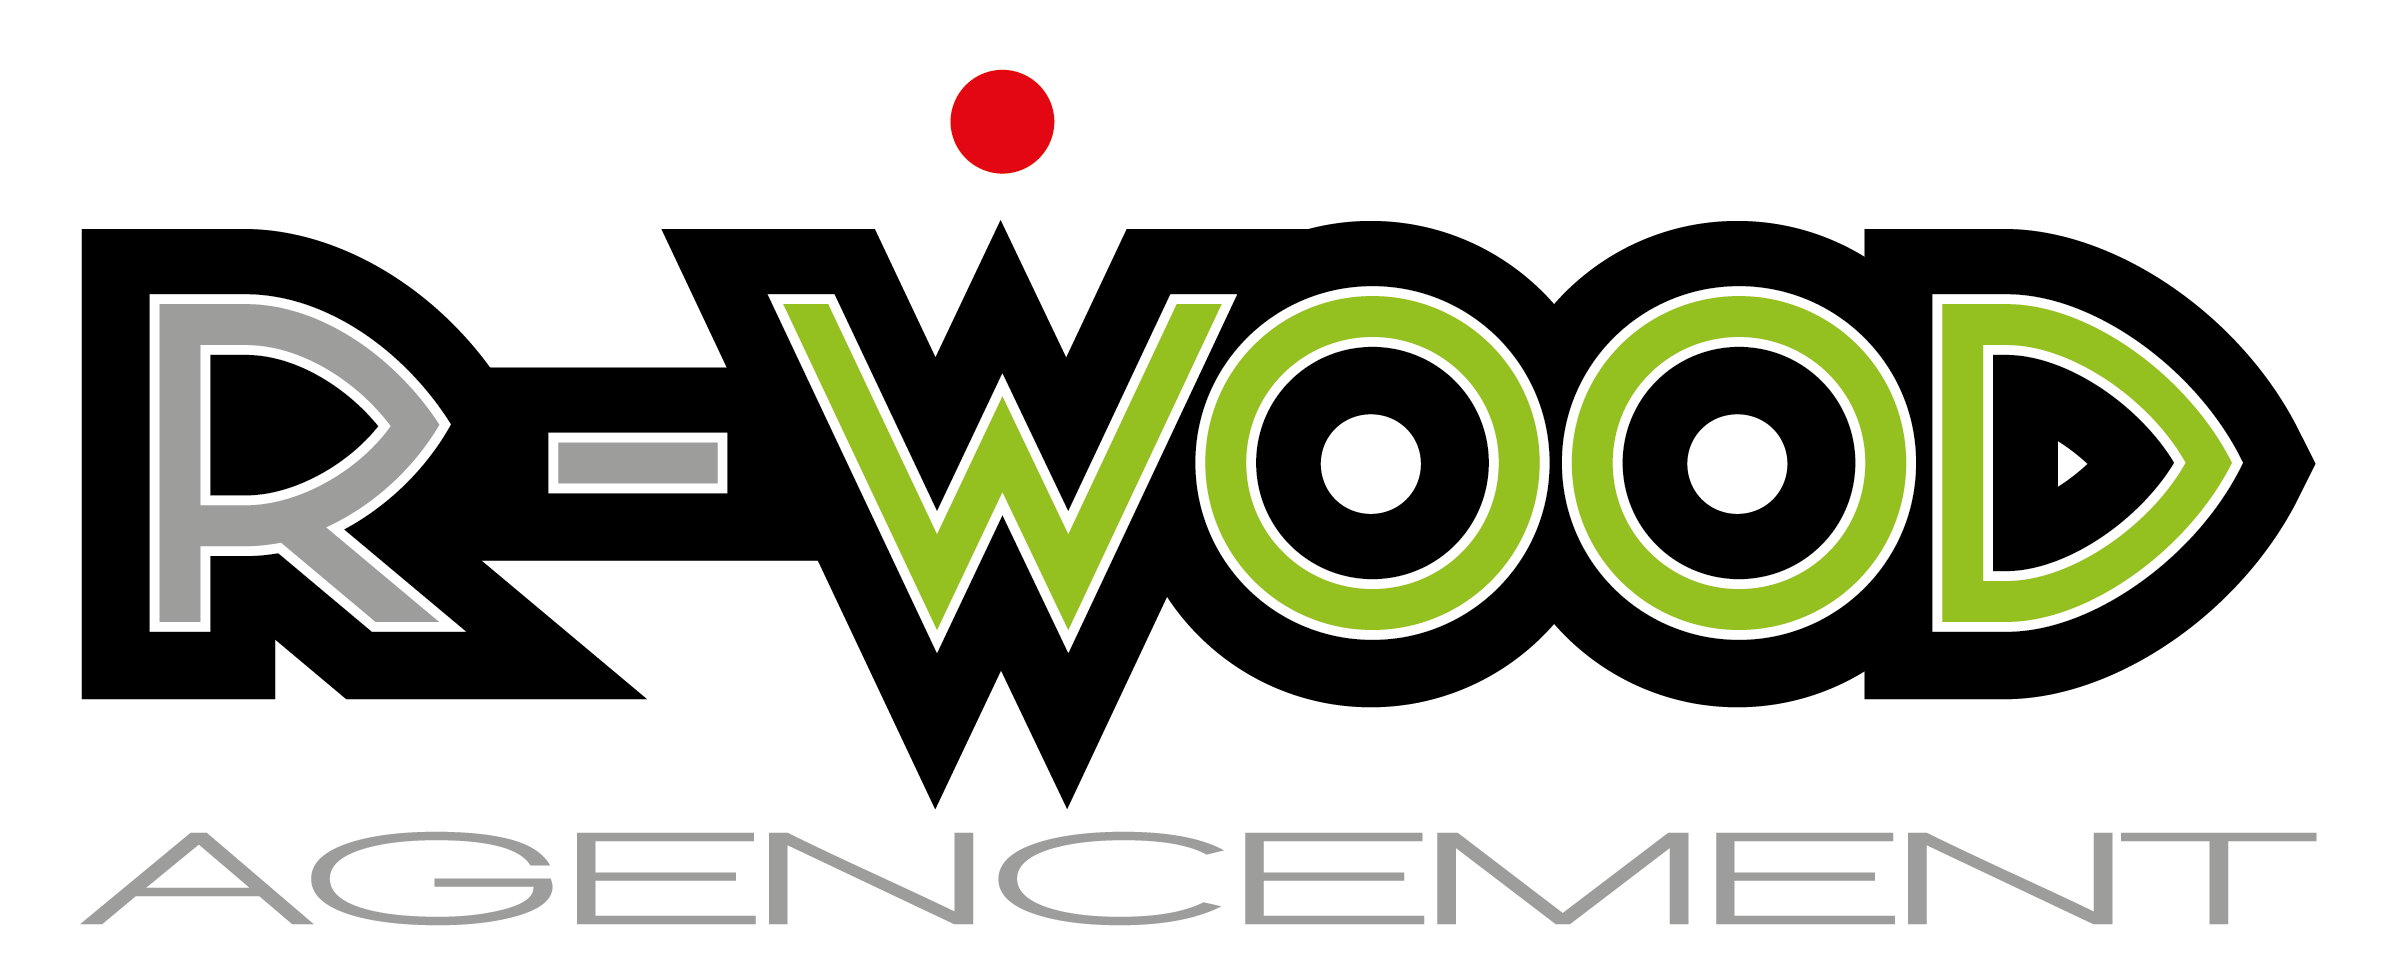 R-Wood Agencement